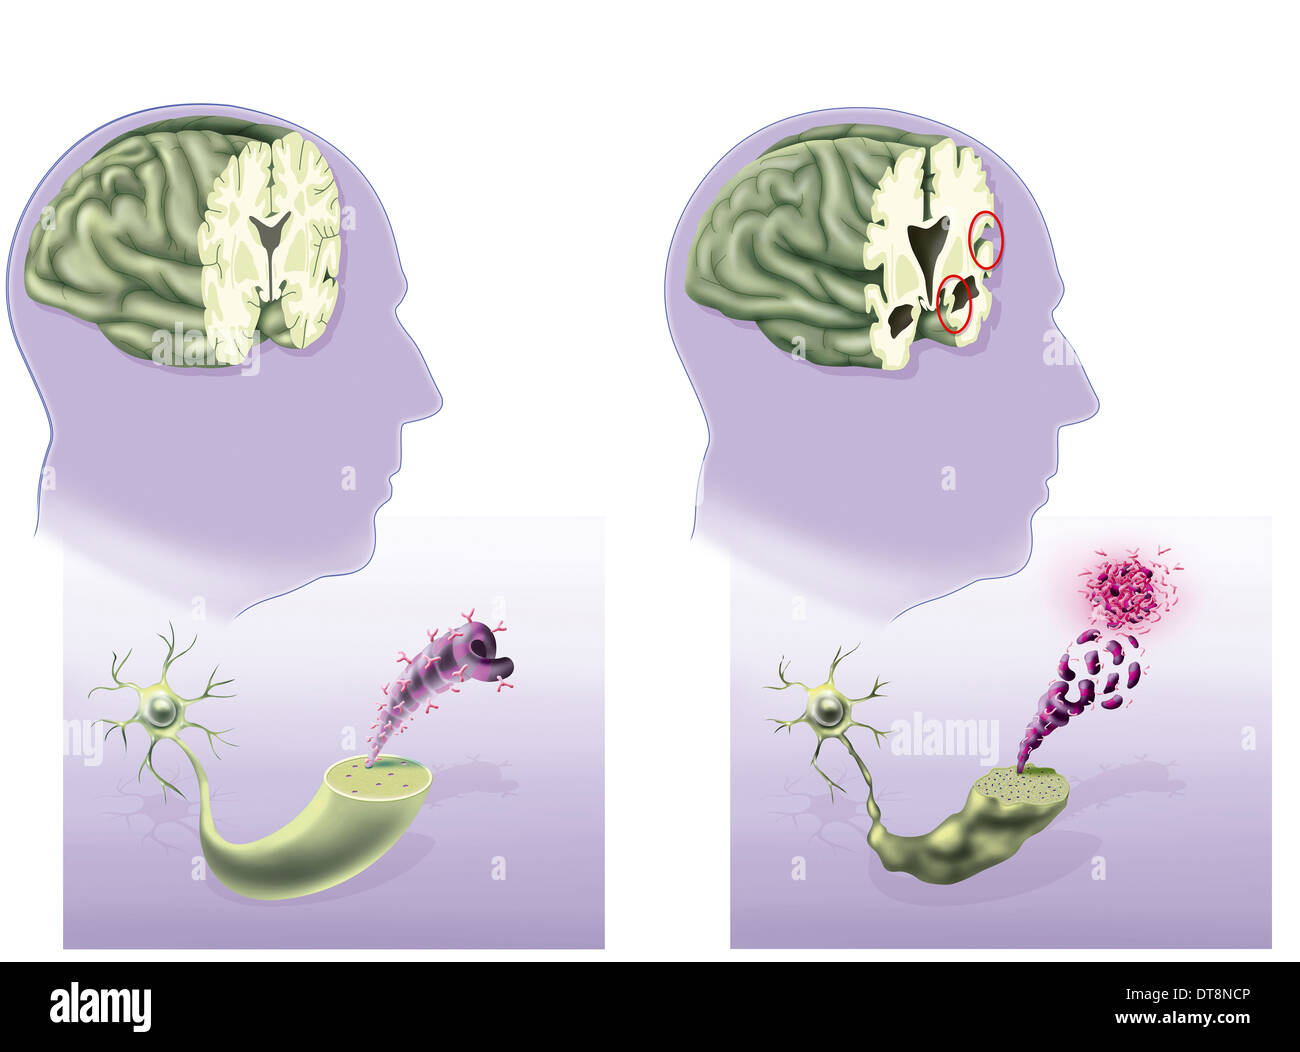 ALZHEIMER'S DISEASE, DRAWING Stock Photo